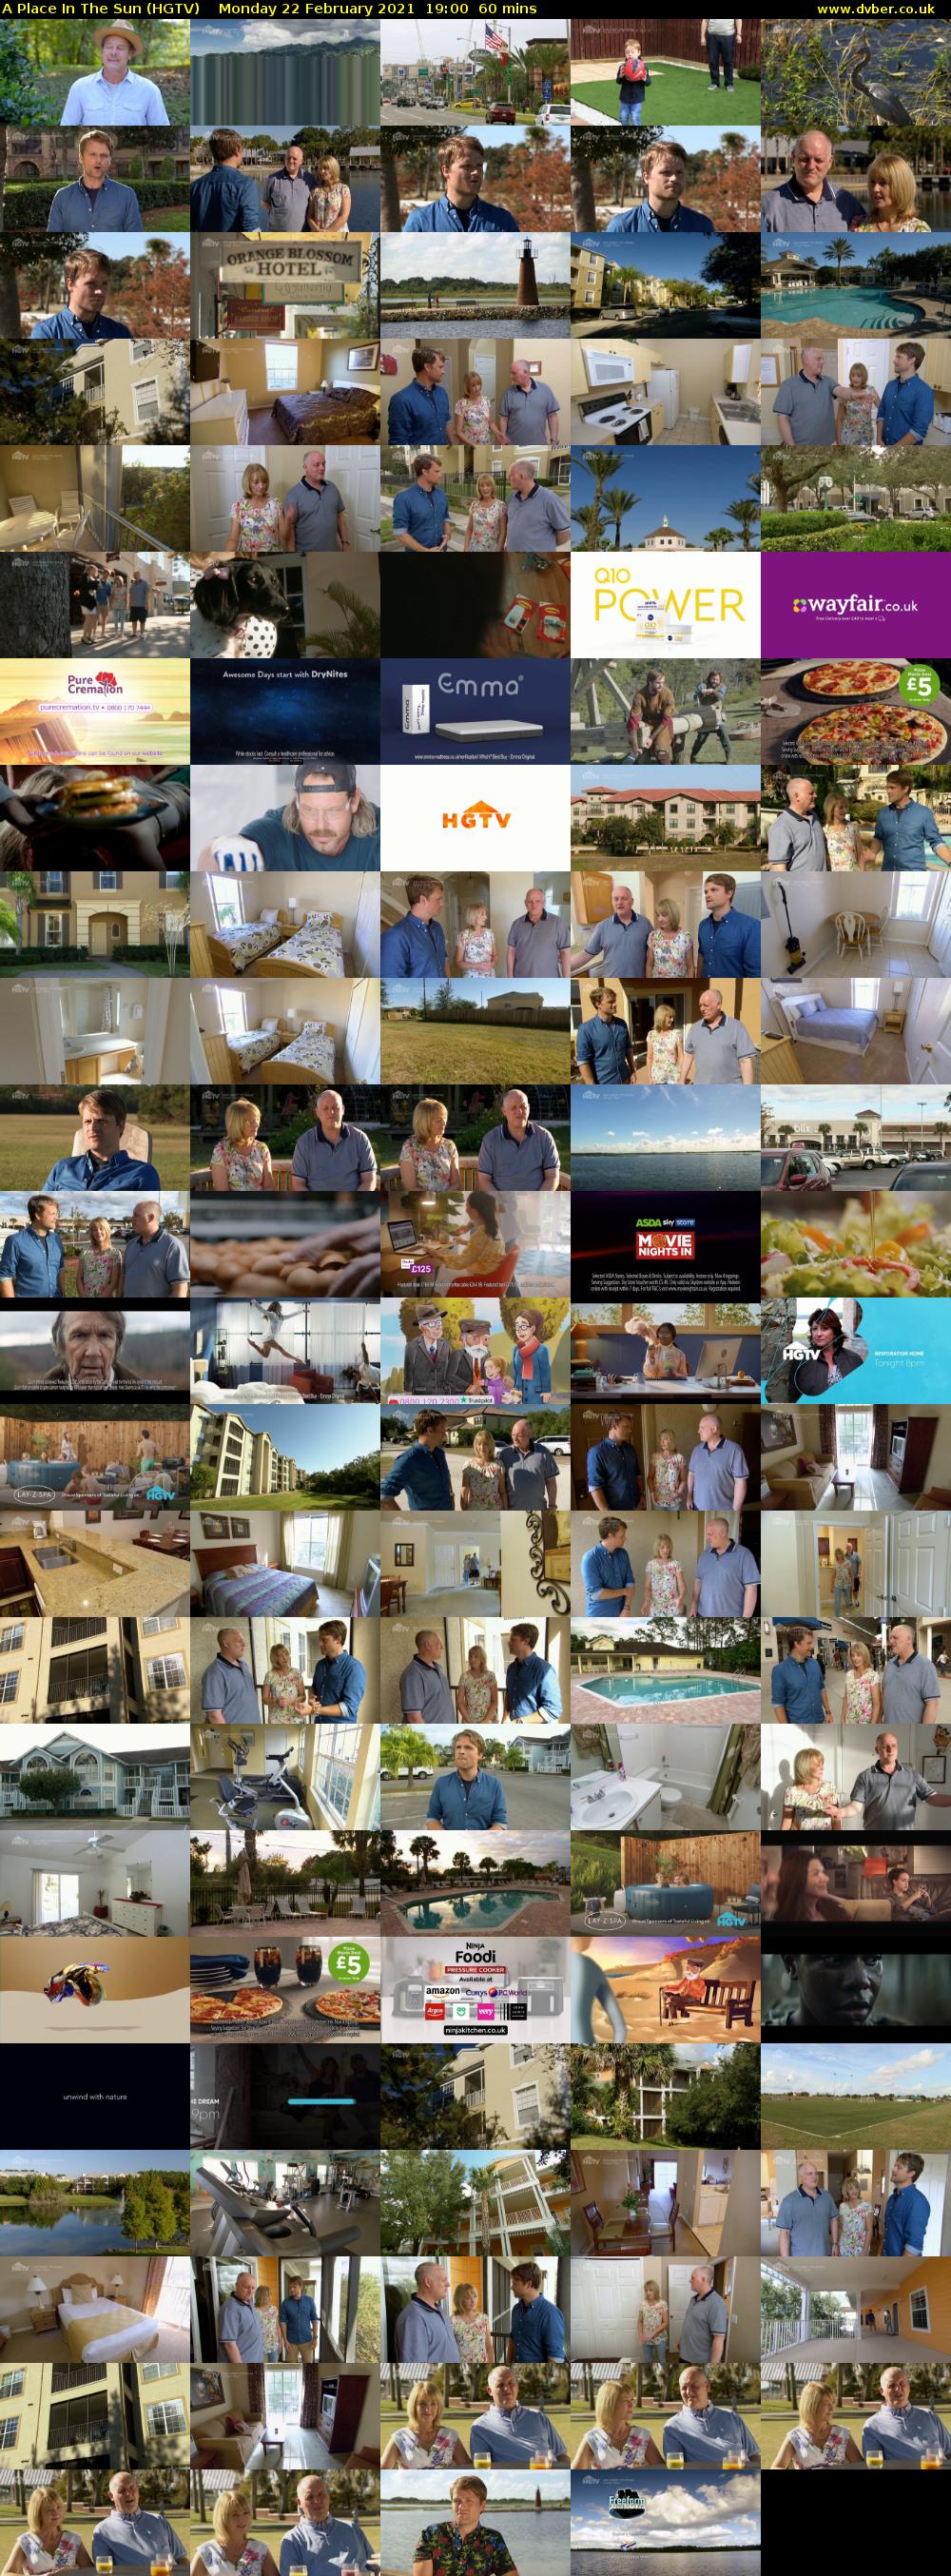 A Place In The Sun (HGTV) Monday 22 February 2021 19:00 - 20:00